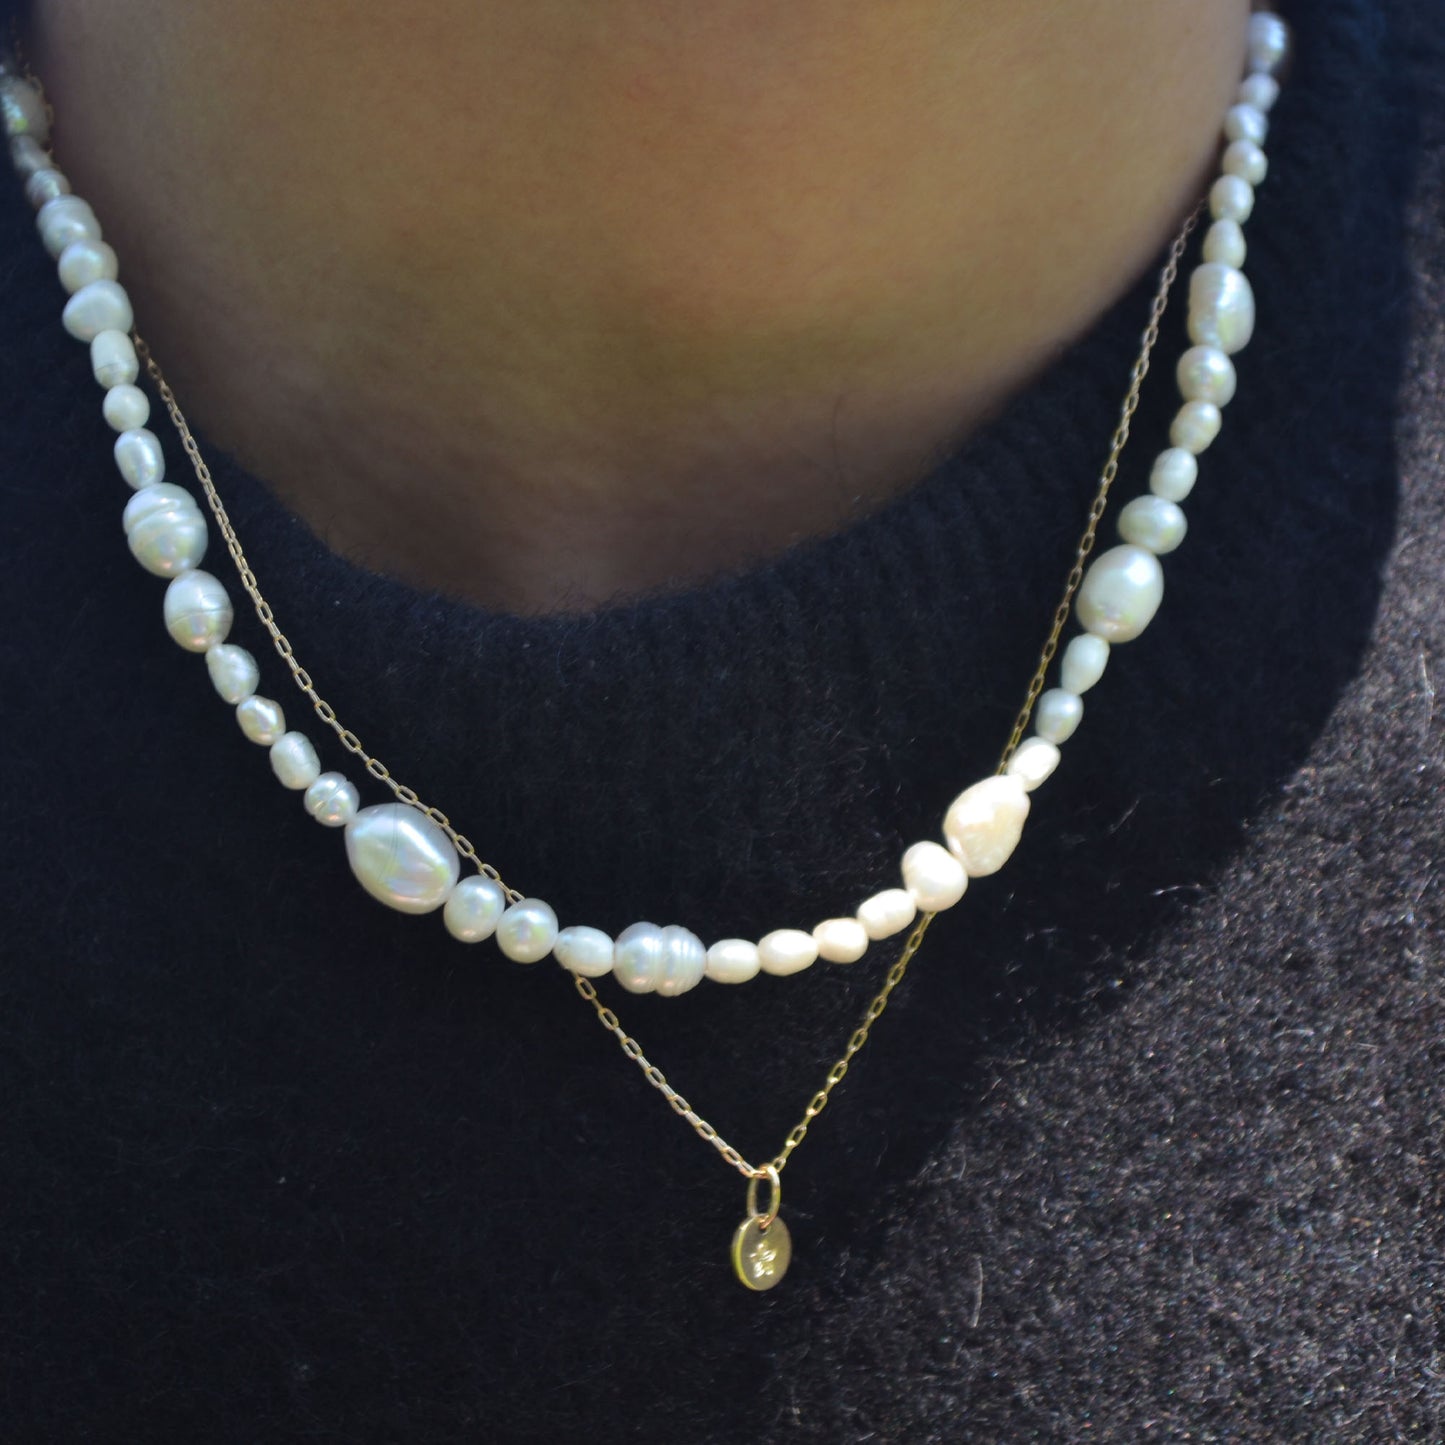 Stitch pearl necklace gold filled for men